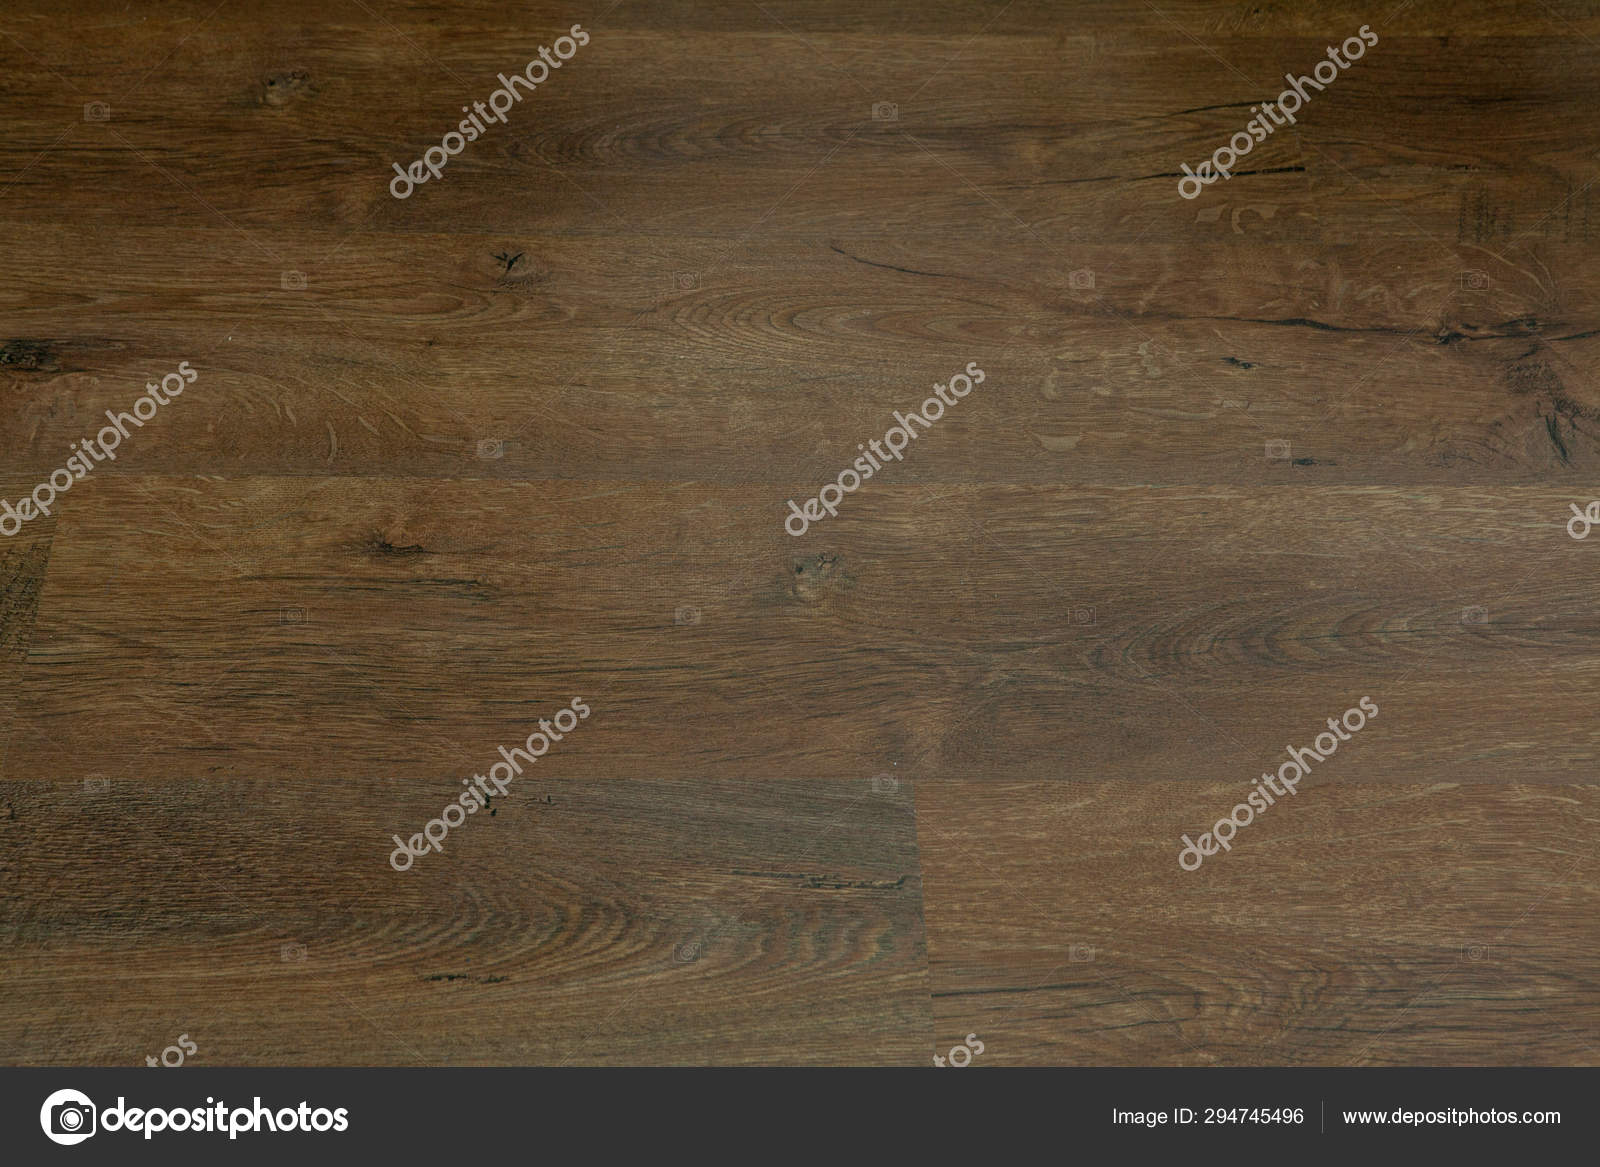 Solid wood Plywood and veneer slide sheet,  oak,Beech,Cherry,Walnut,Maple,Ash,Wenge,pine,teak,Rosewood and other for  furniture construction tools or house or on mdf,pb on surface background  texture. Stock Photo by ©volody100@ 294745496